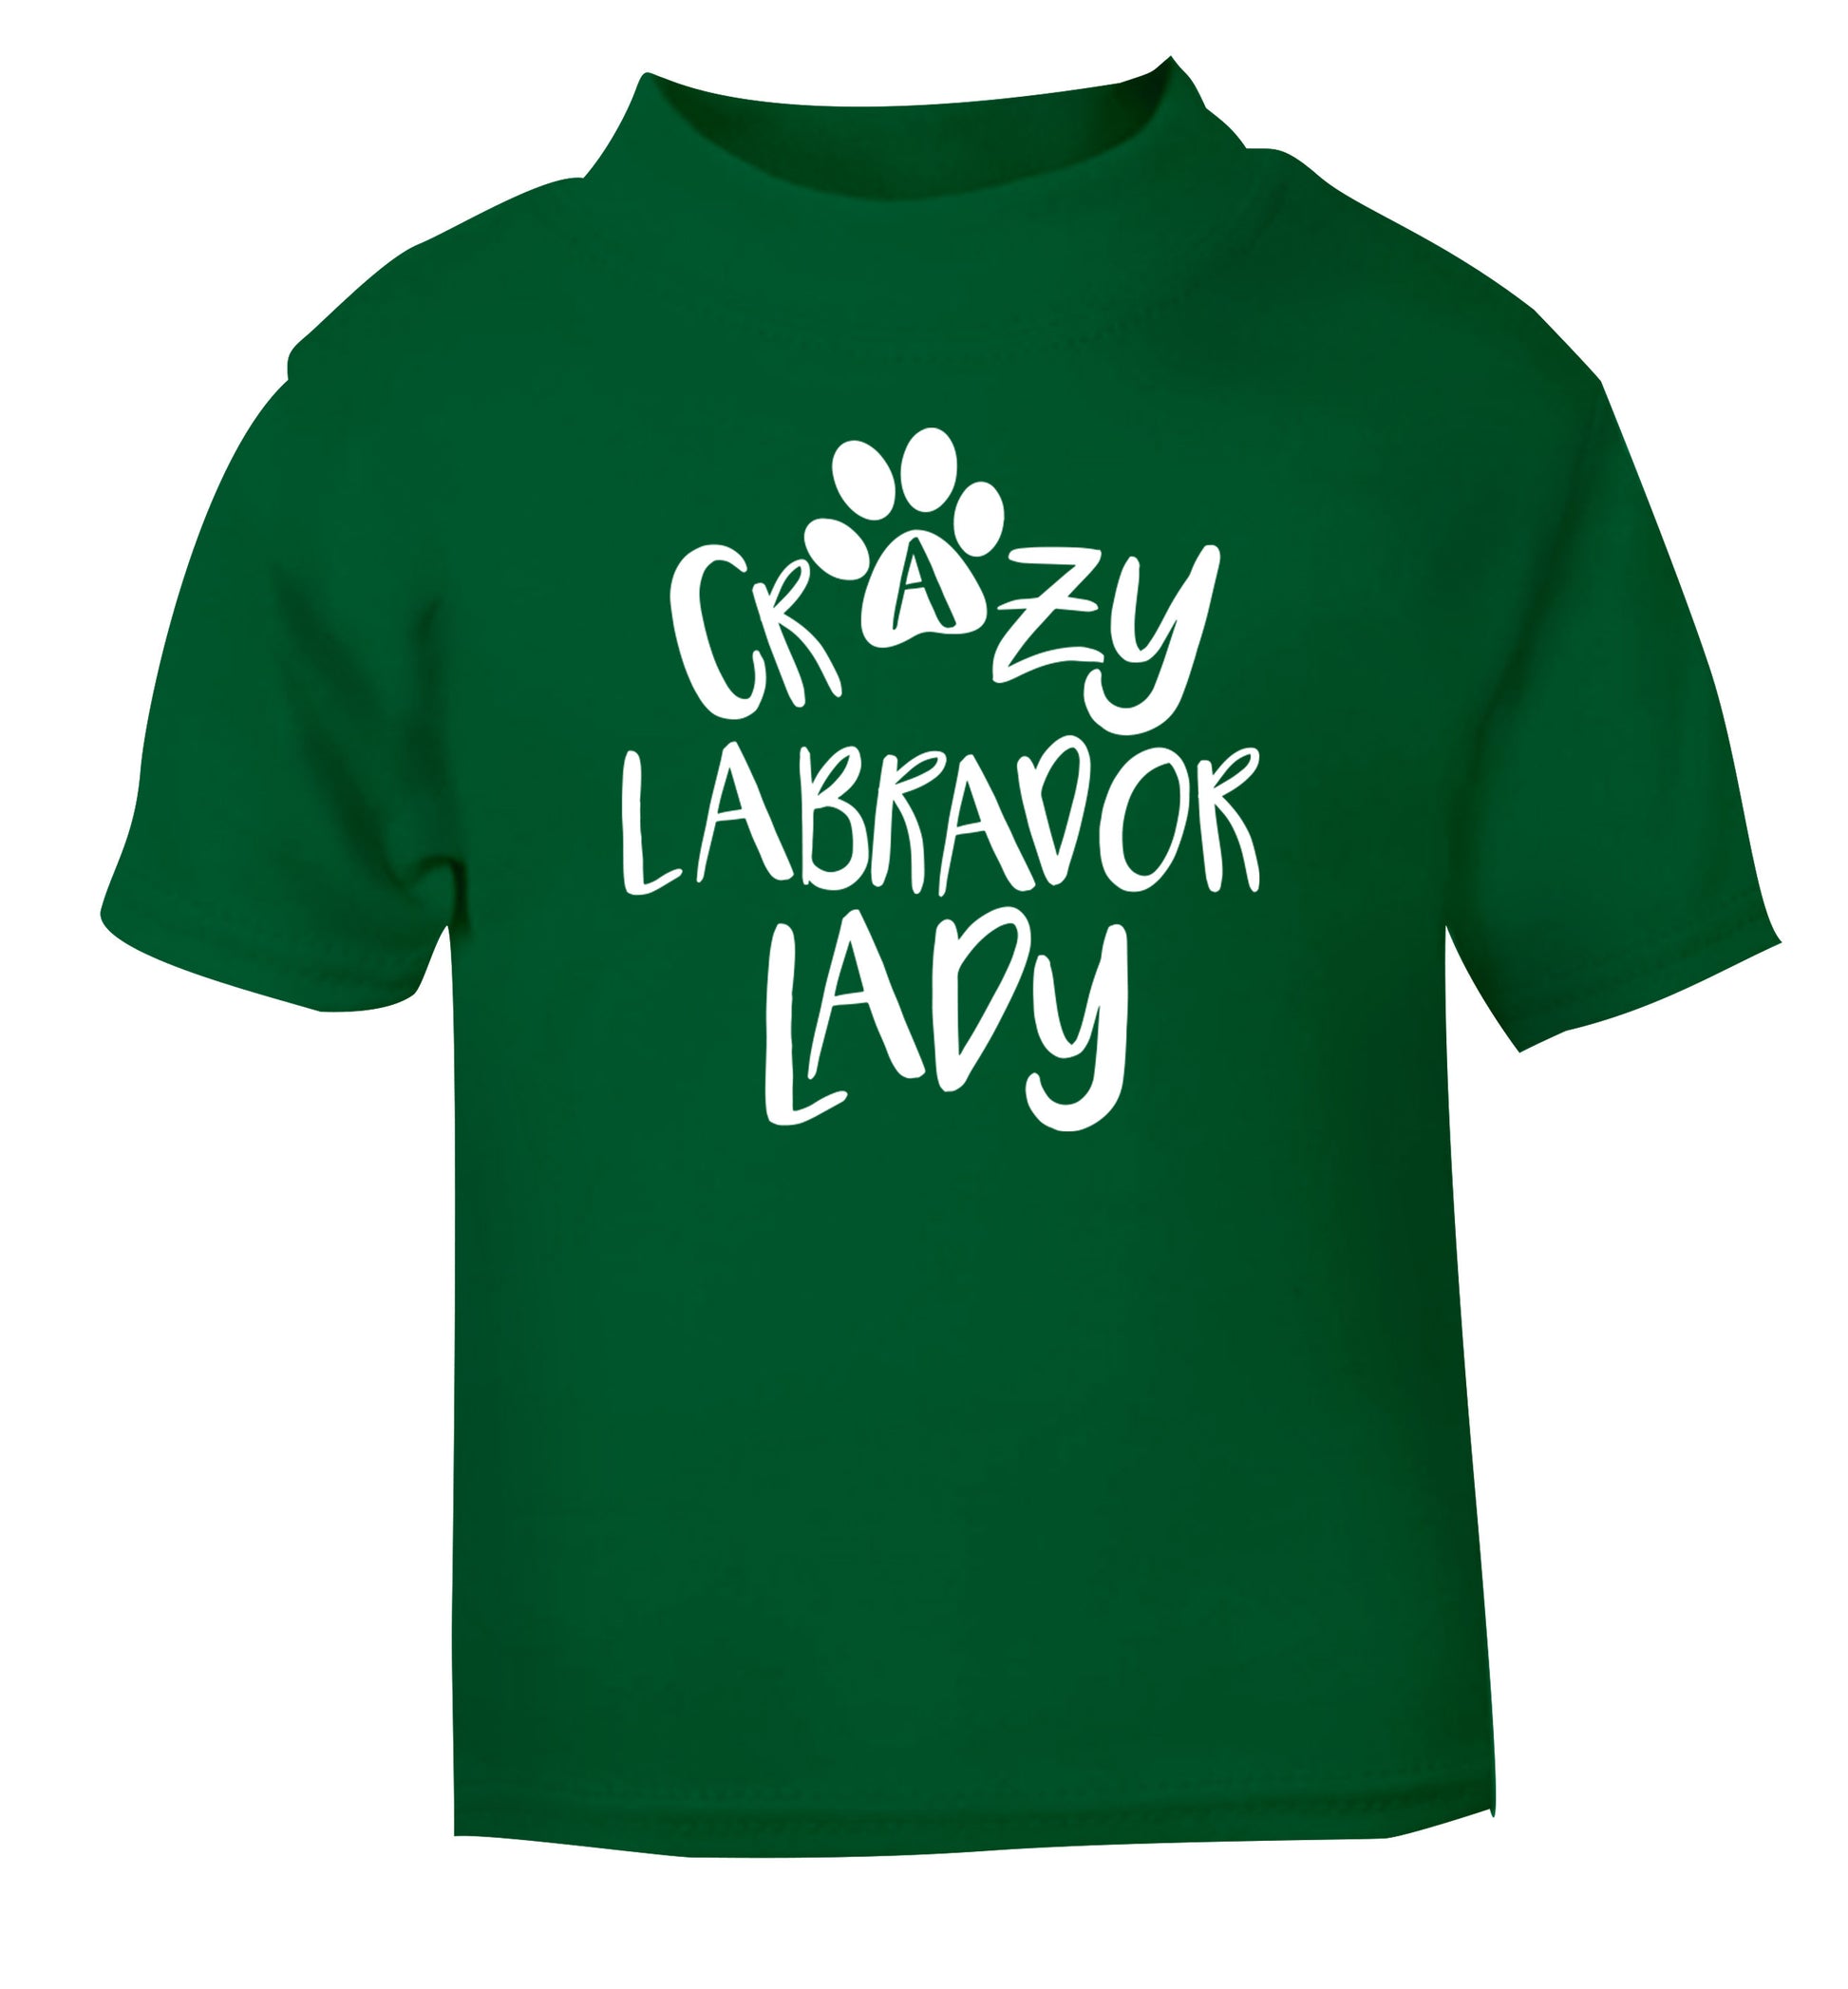 Crazy labrador lady green Baby Toddler Tshirt 2 Years